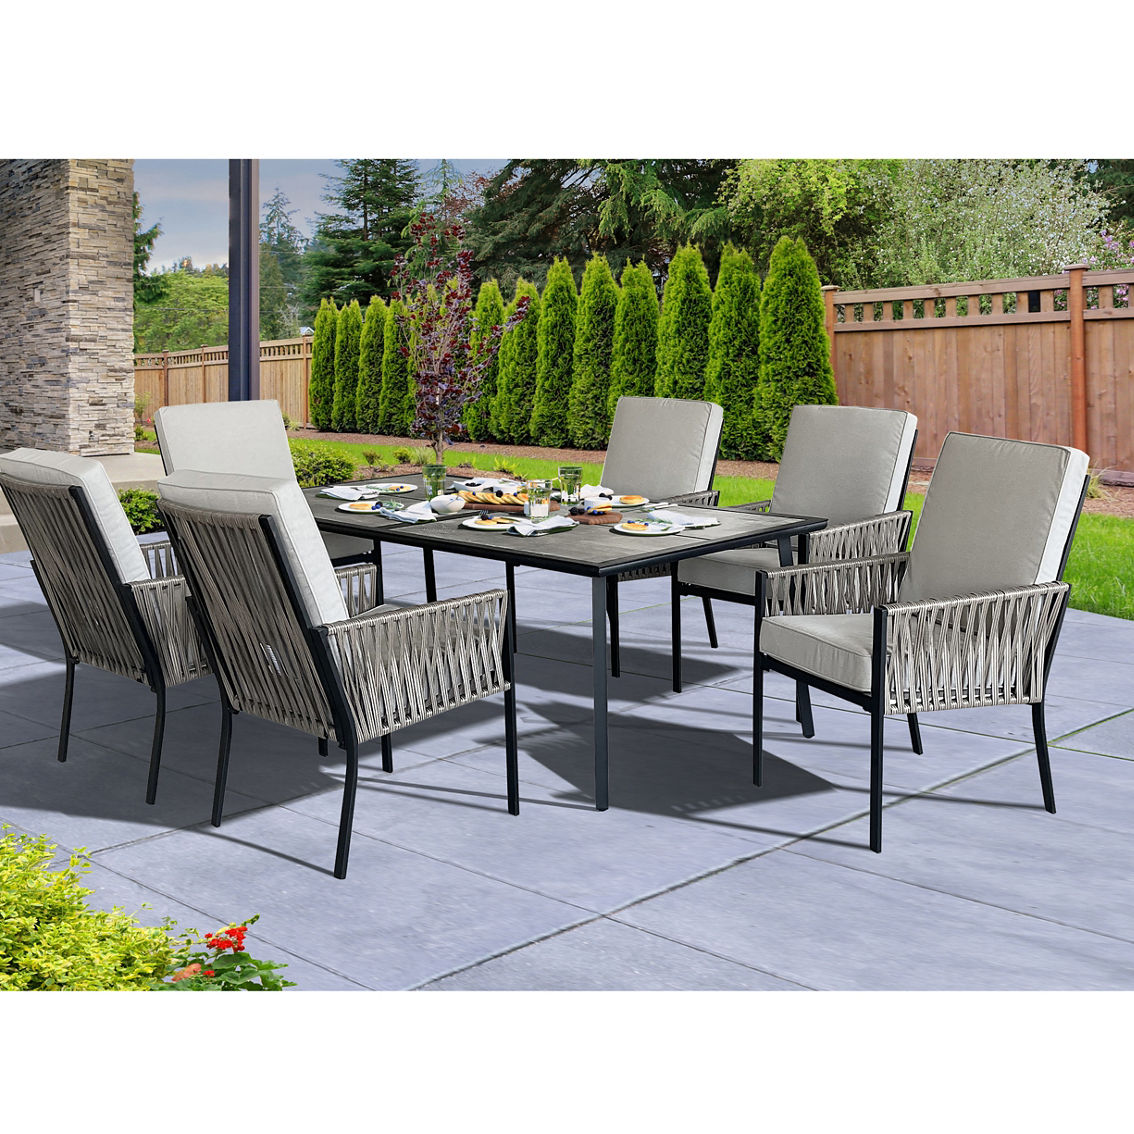 Home Creations Lunding 7 pc. Dining Set - Image 2 of 2